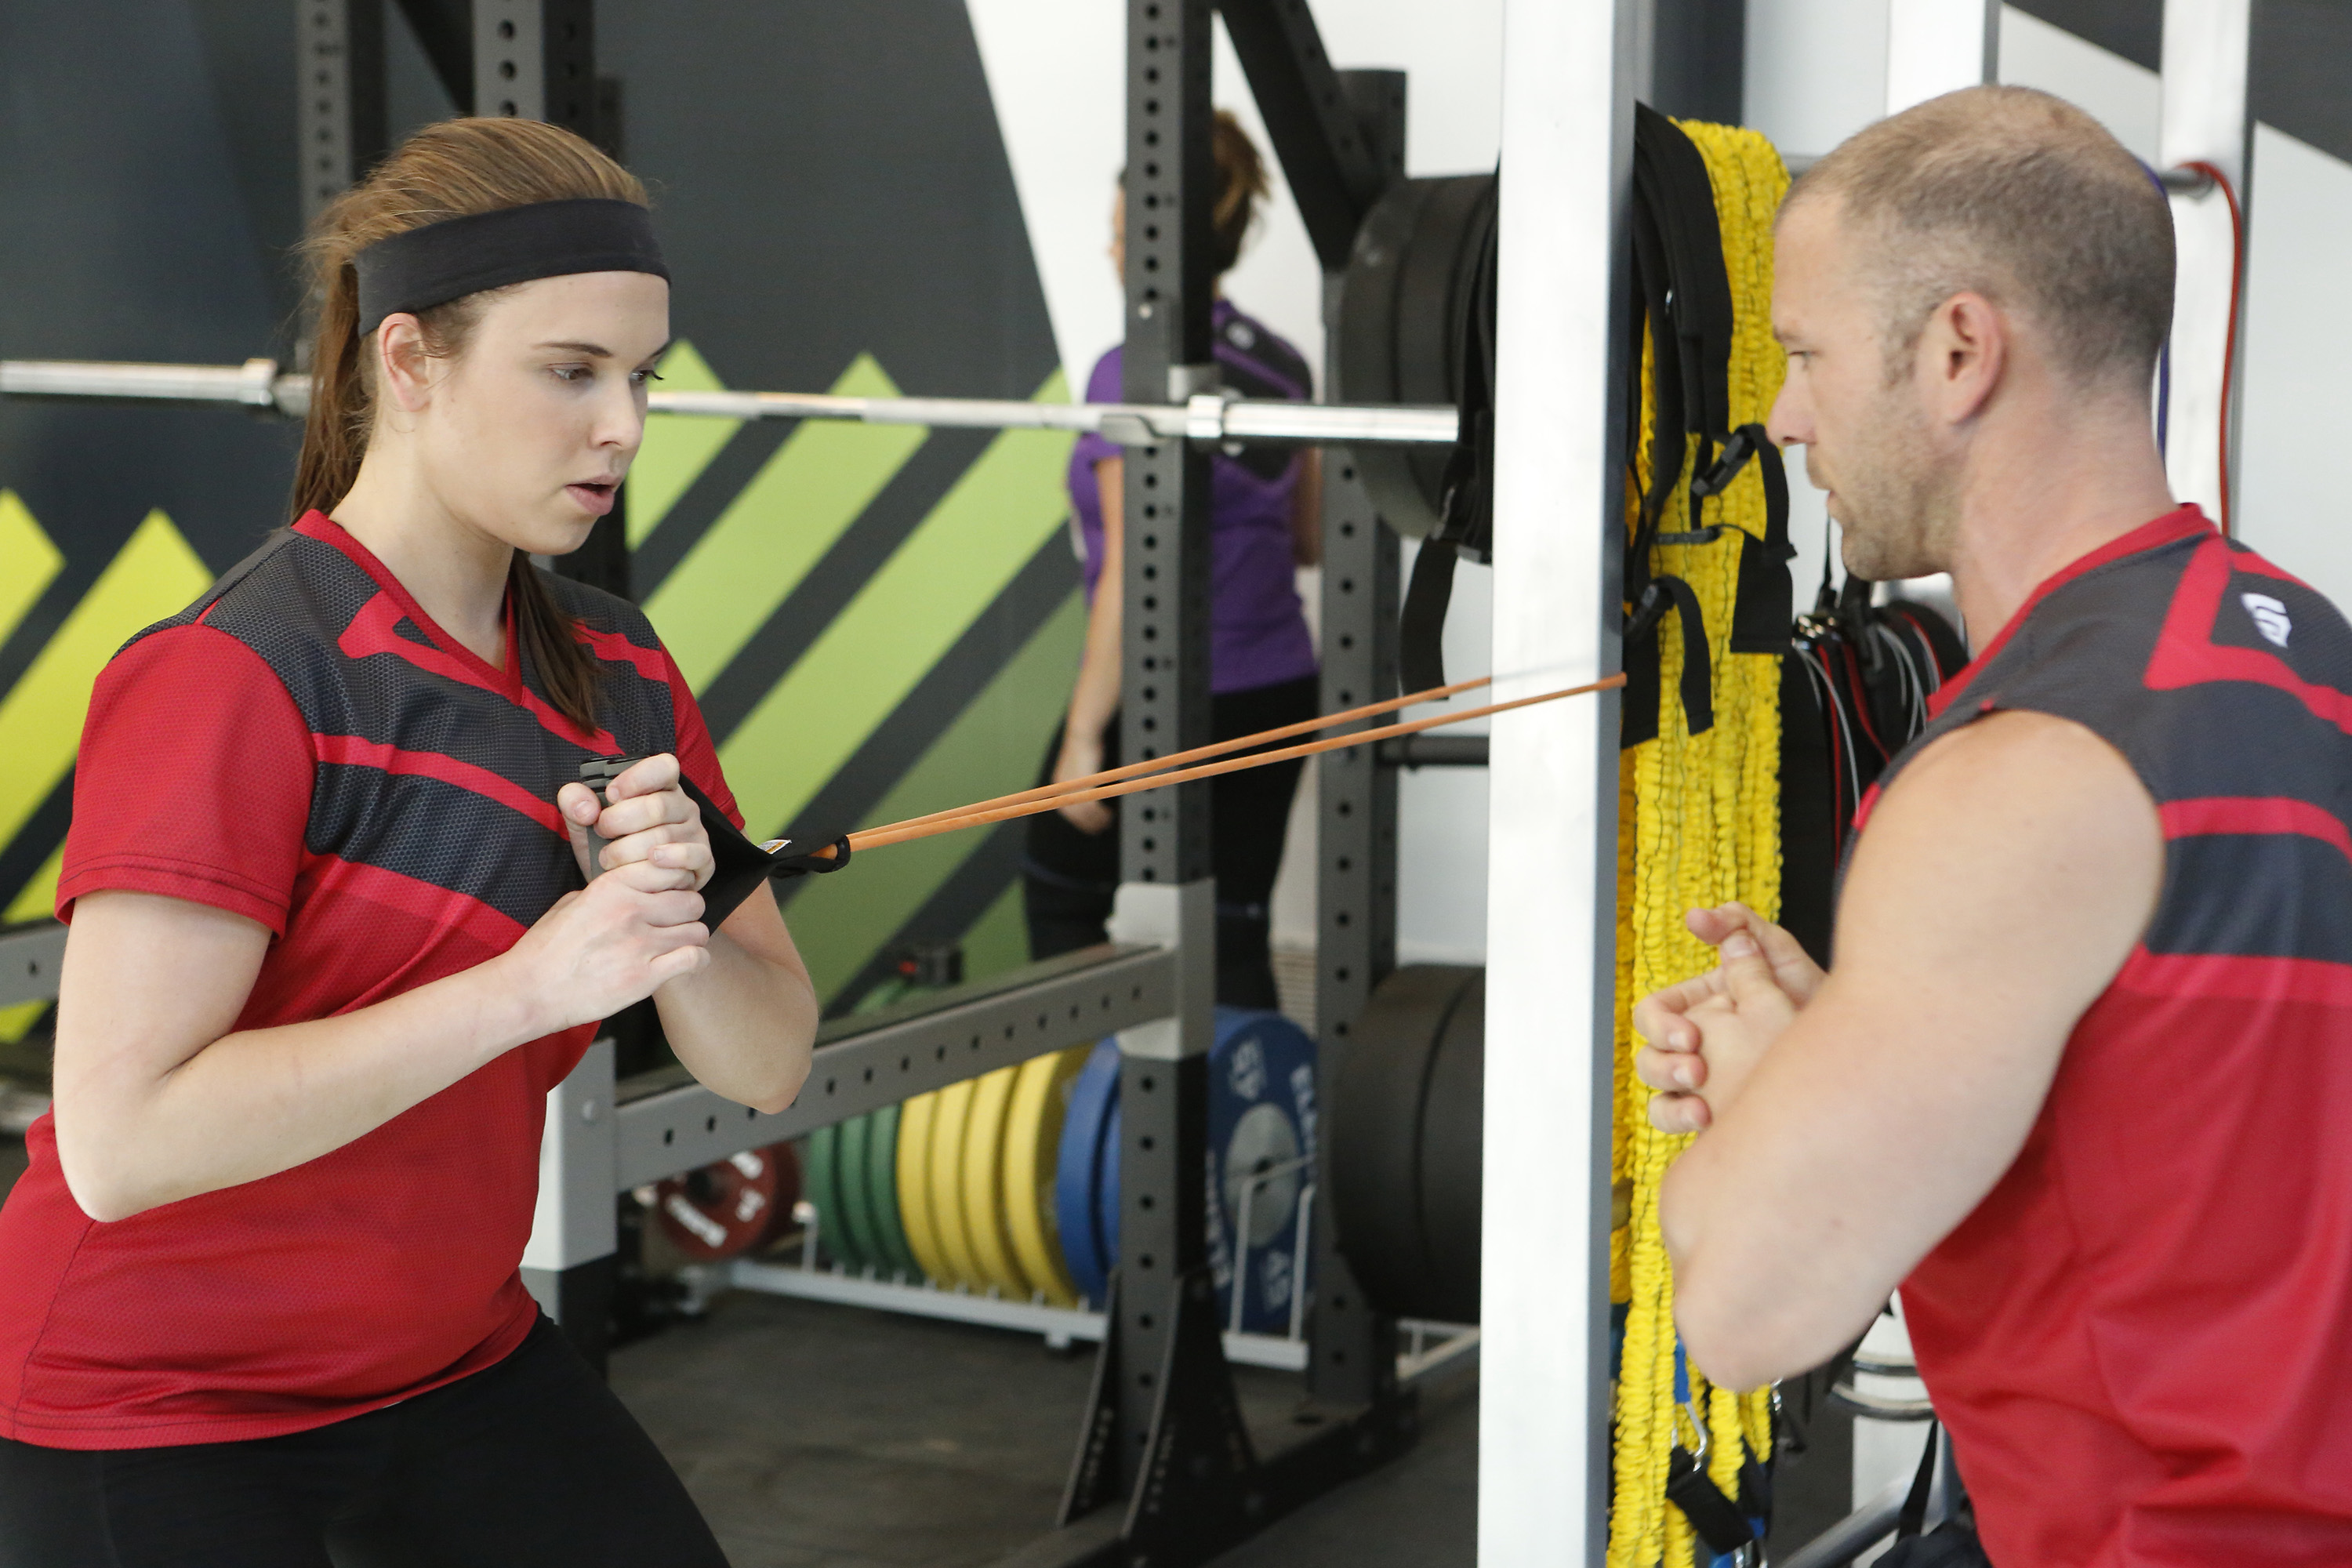 STRONG -- Episode 101 -- Pictured: (l-r) Sarah Miller, Drew Logan -- (Photo by: Trae Patton/NBC)